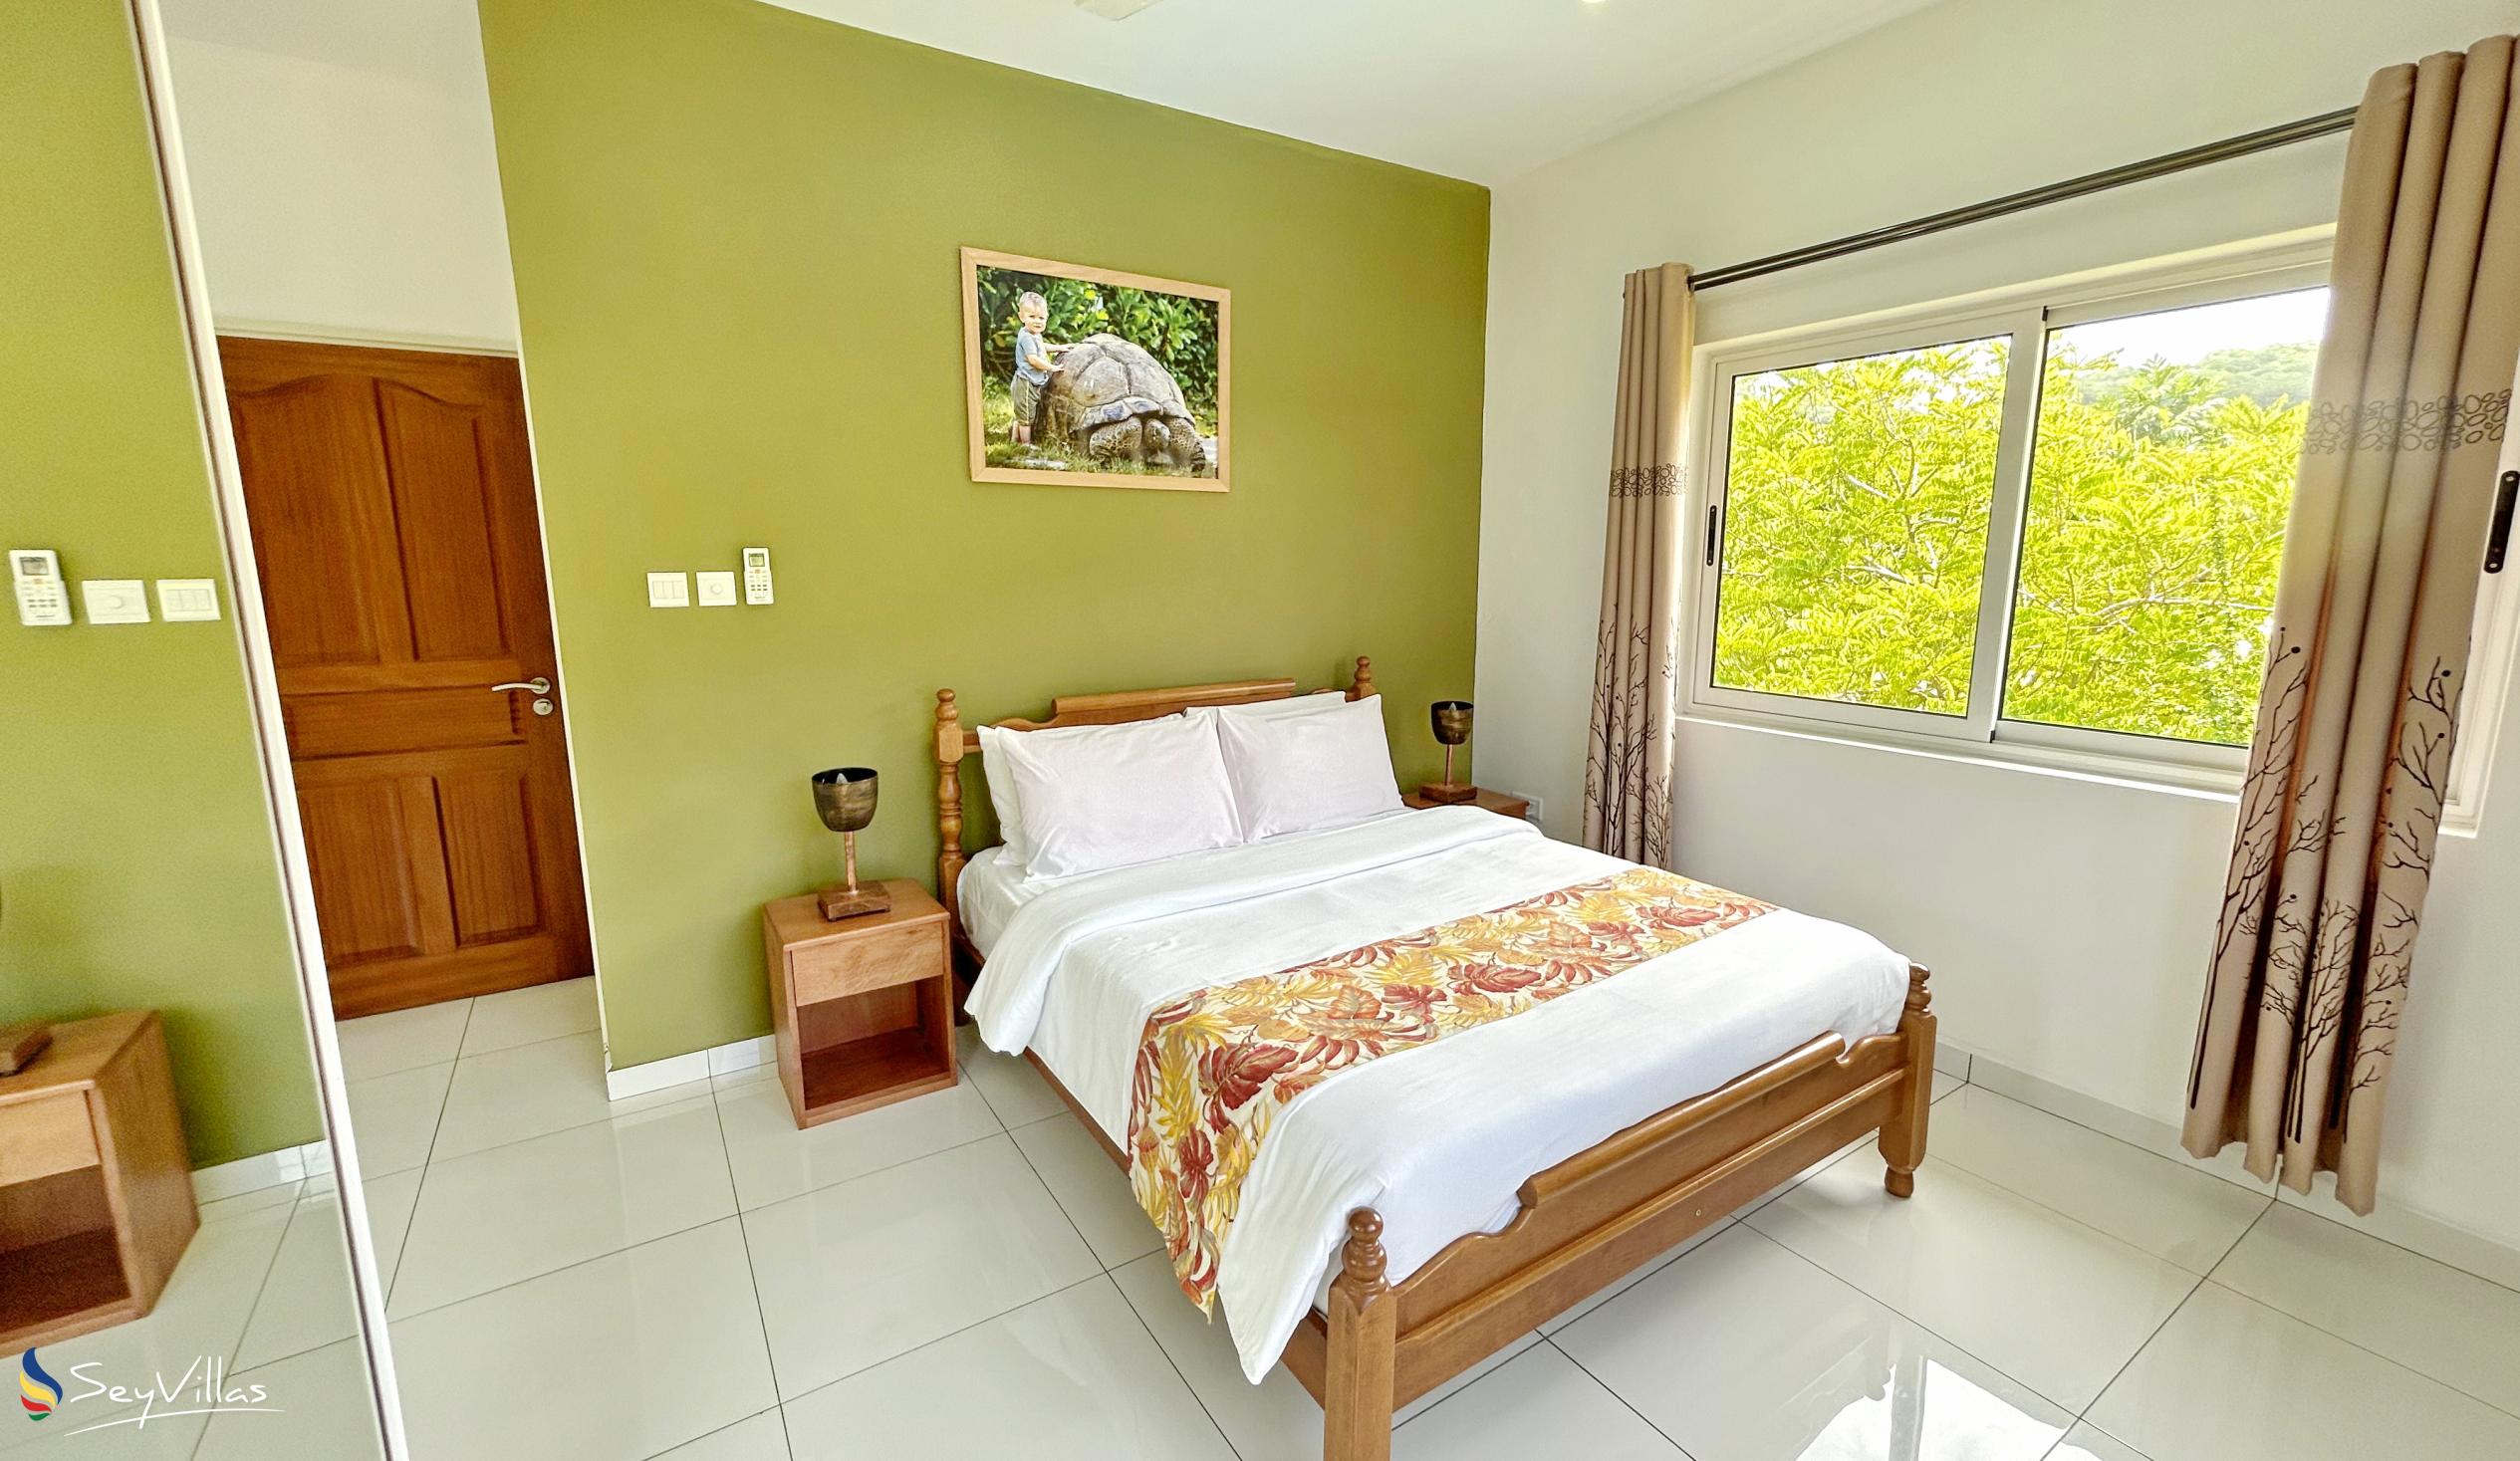 Photo 48: The Seaboards Apartments - 2-Bedroom Apartment - Mahé (Seychelles)